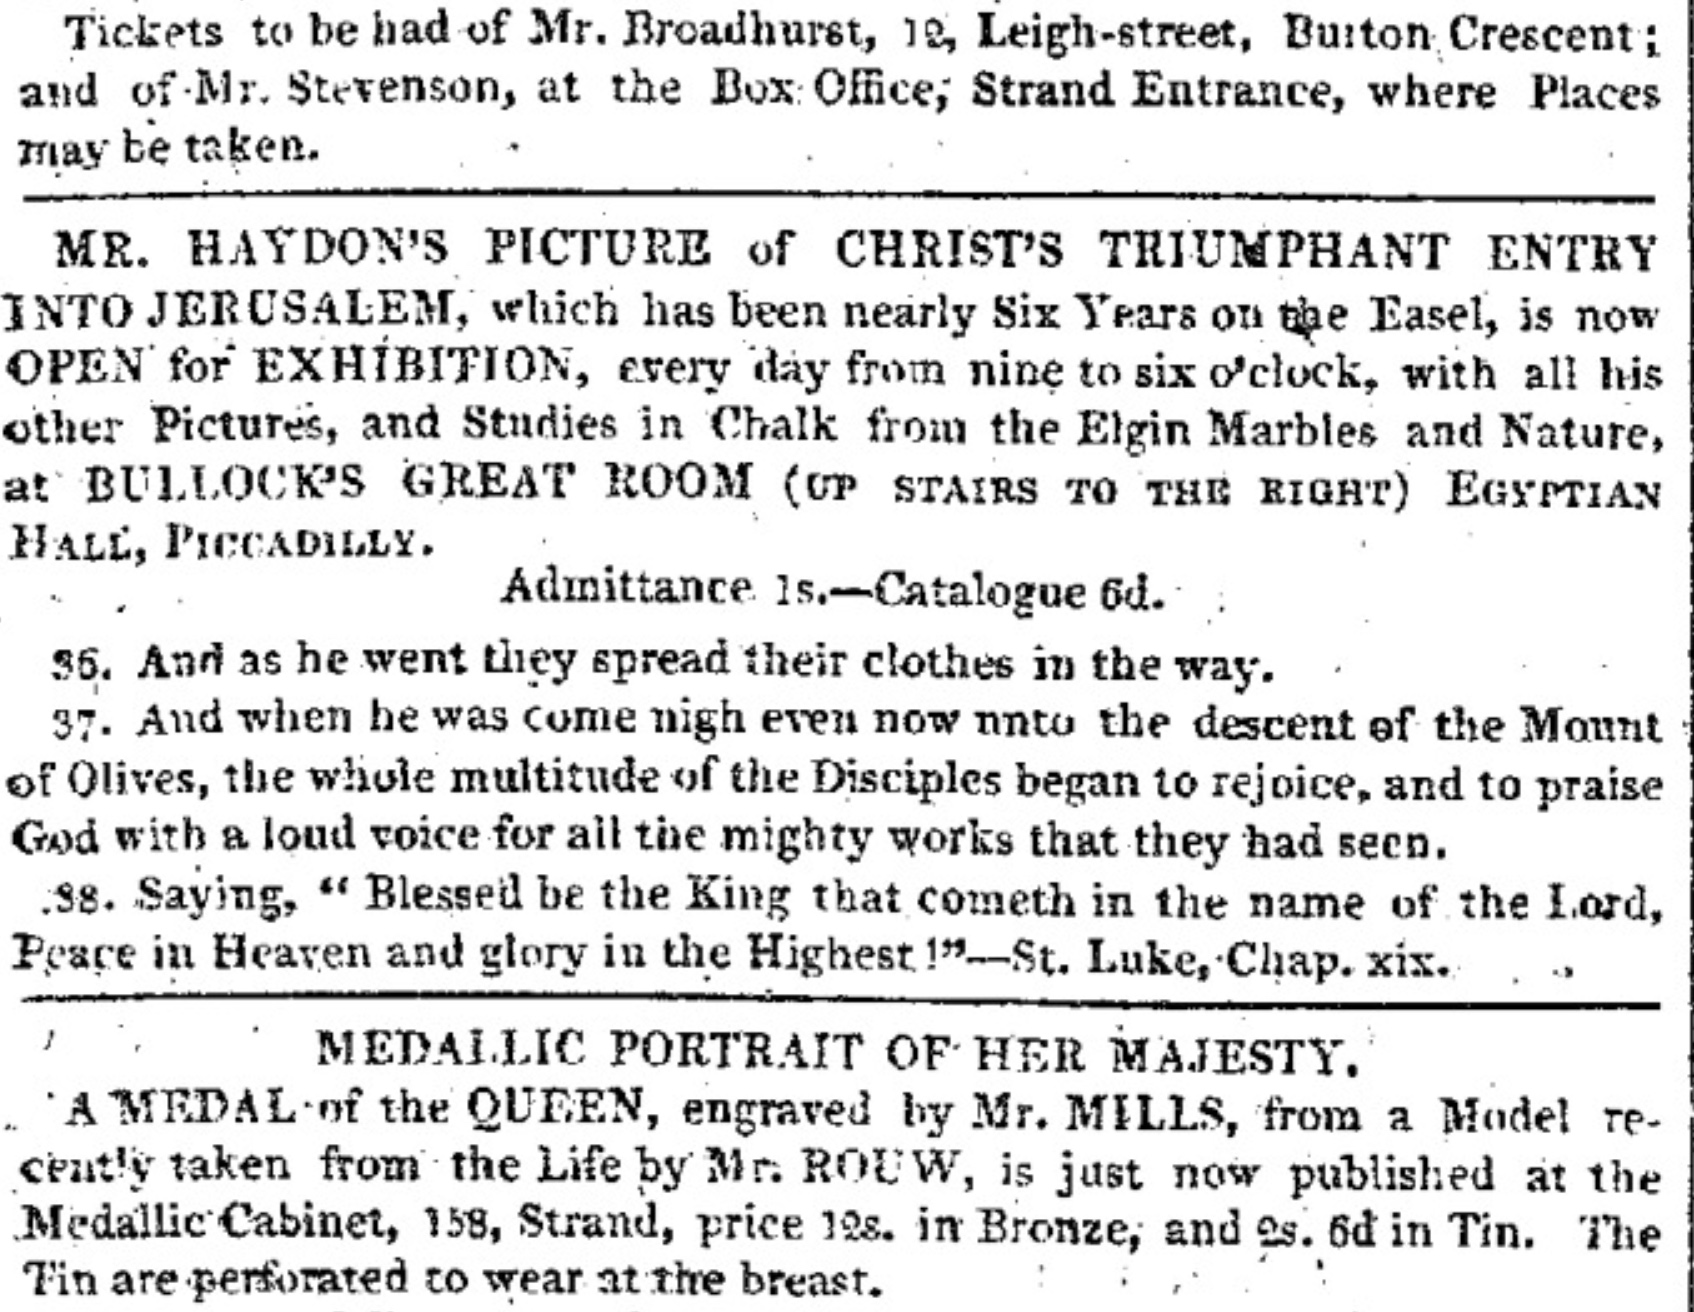 Six Years on the Easel: Haydonâ€™s Christâ€™s Triumphant
          Entry into Jerusalem,
        The Examiner, 1 Oct 1820 (click to enlarge)